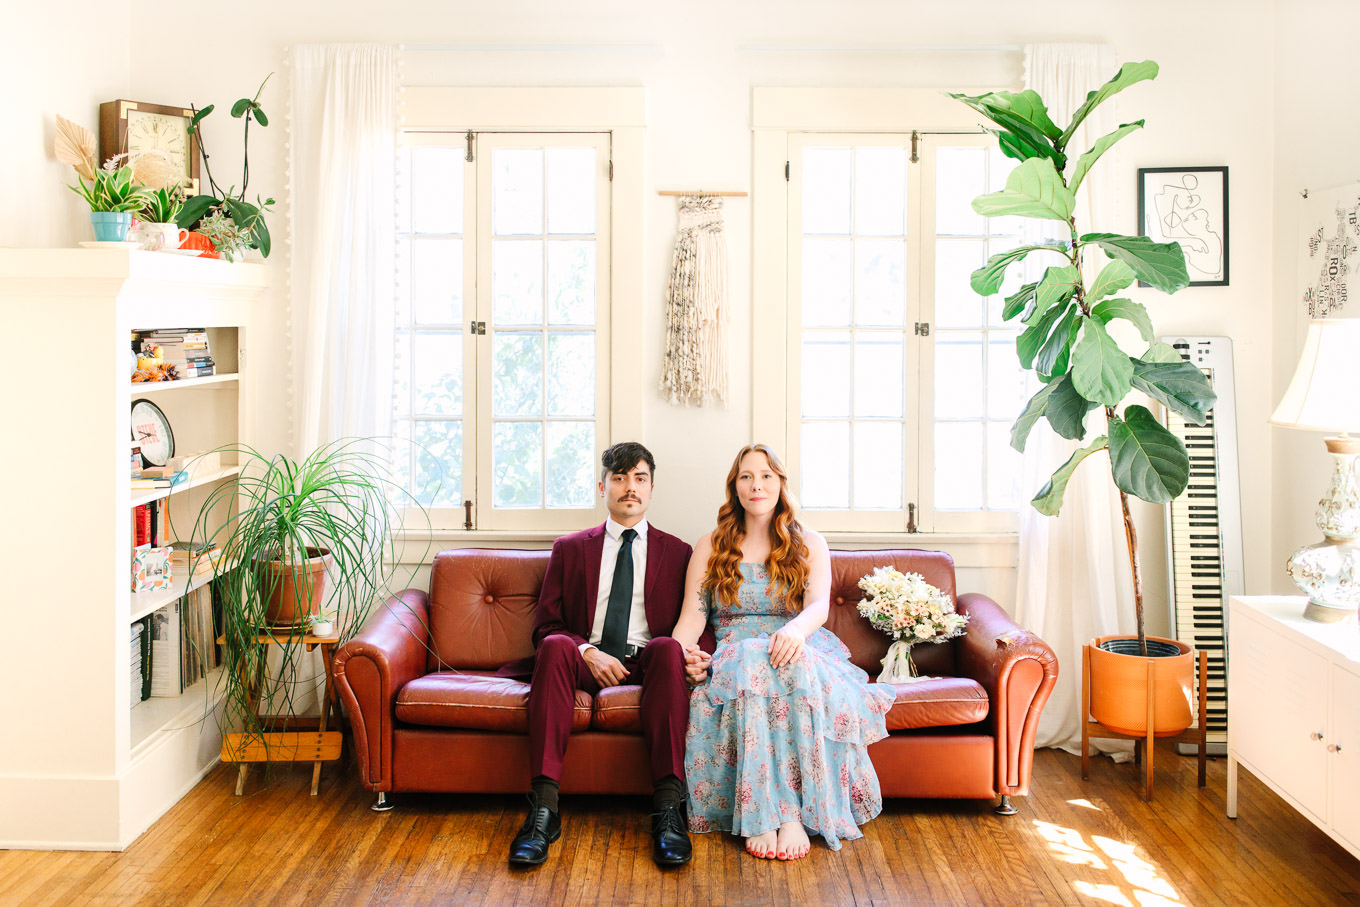 Couple sitting on leather couch in boho living room with plants | Los Angeles Arboretum Elopement | Colorful and elevated wedding photography for fun-loving couples in Southern California | #LosAngelesElopement #elopement #LAarboretum #LAskyline #elopementphotos   Source: Mary Costa Photography | Los Angeles